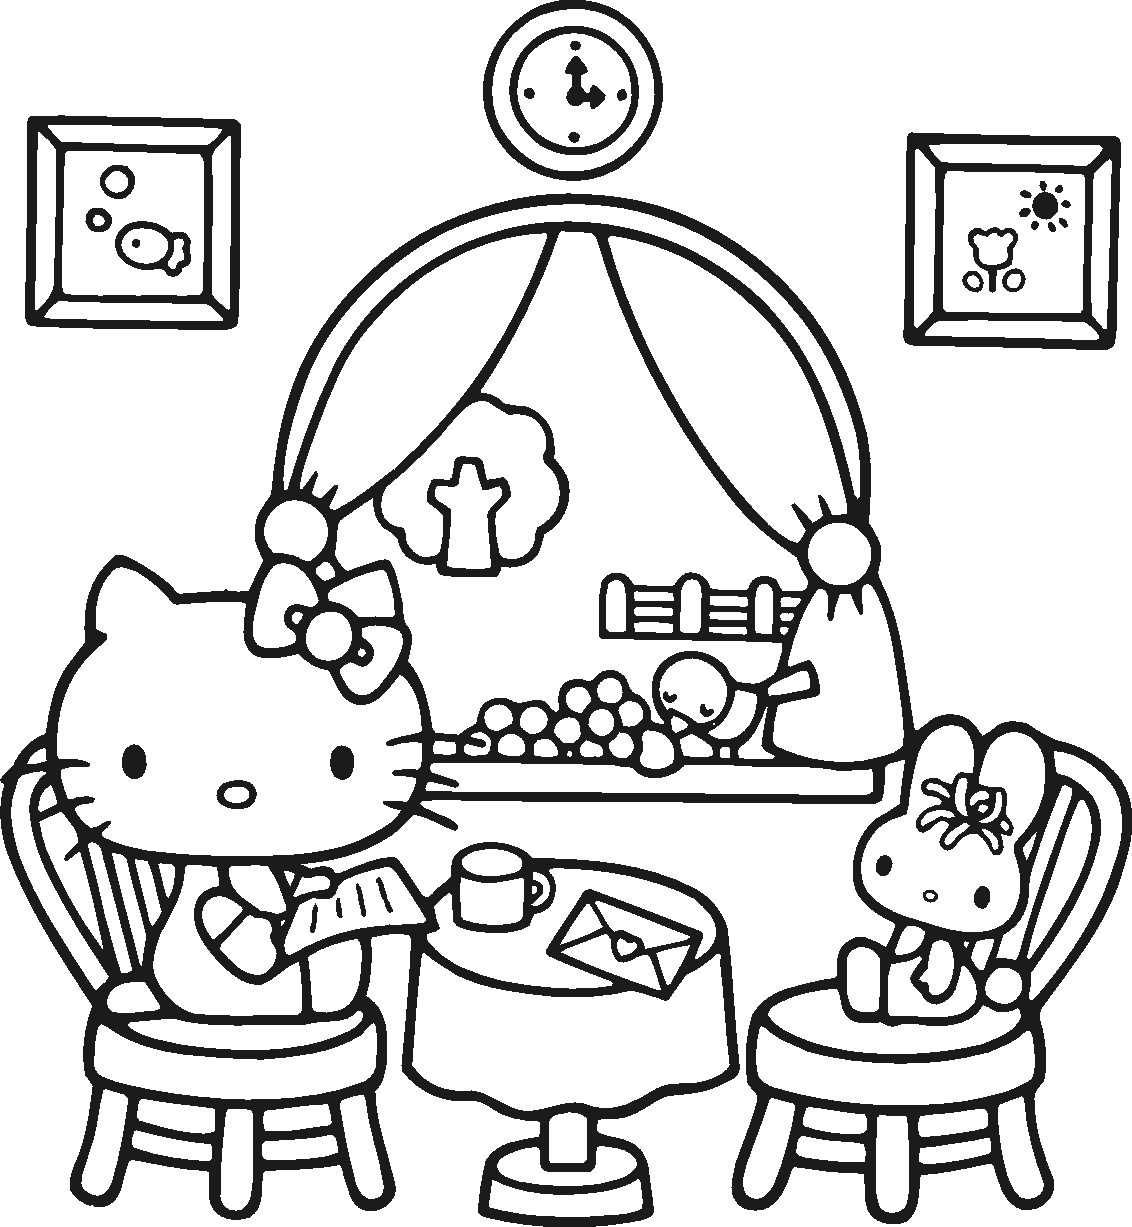 printable coloring pages of hello kitty